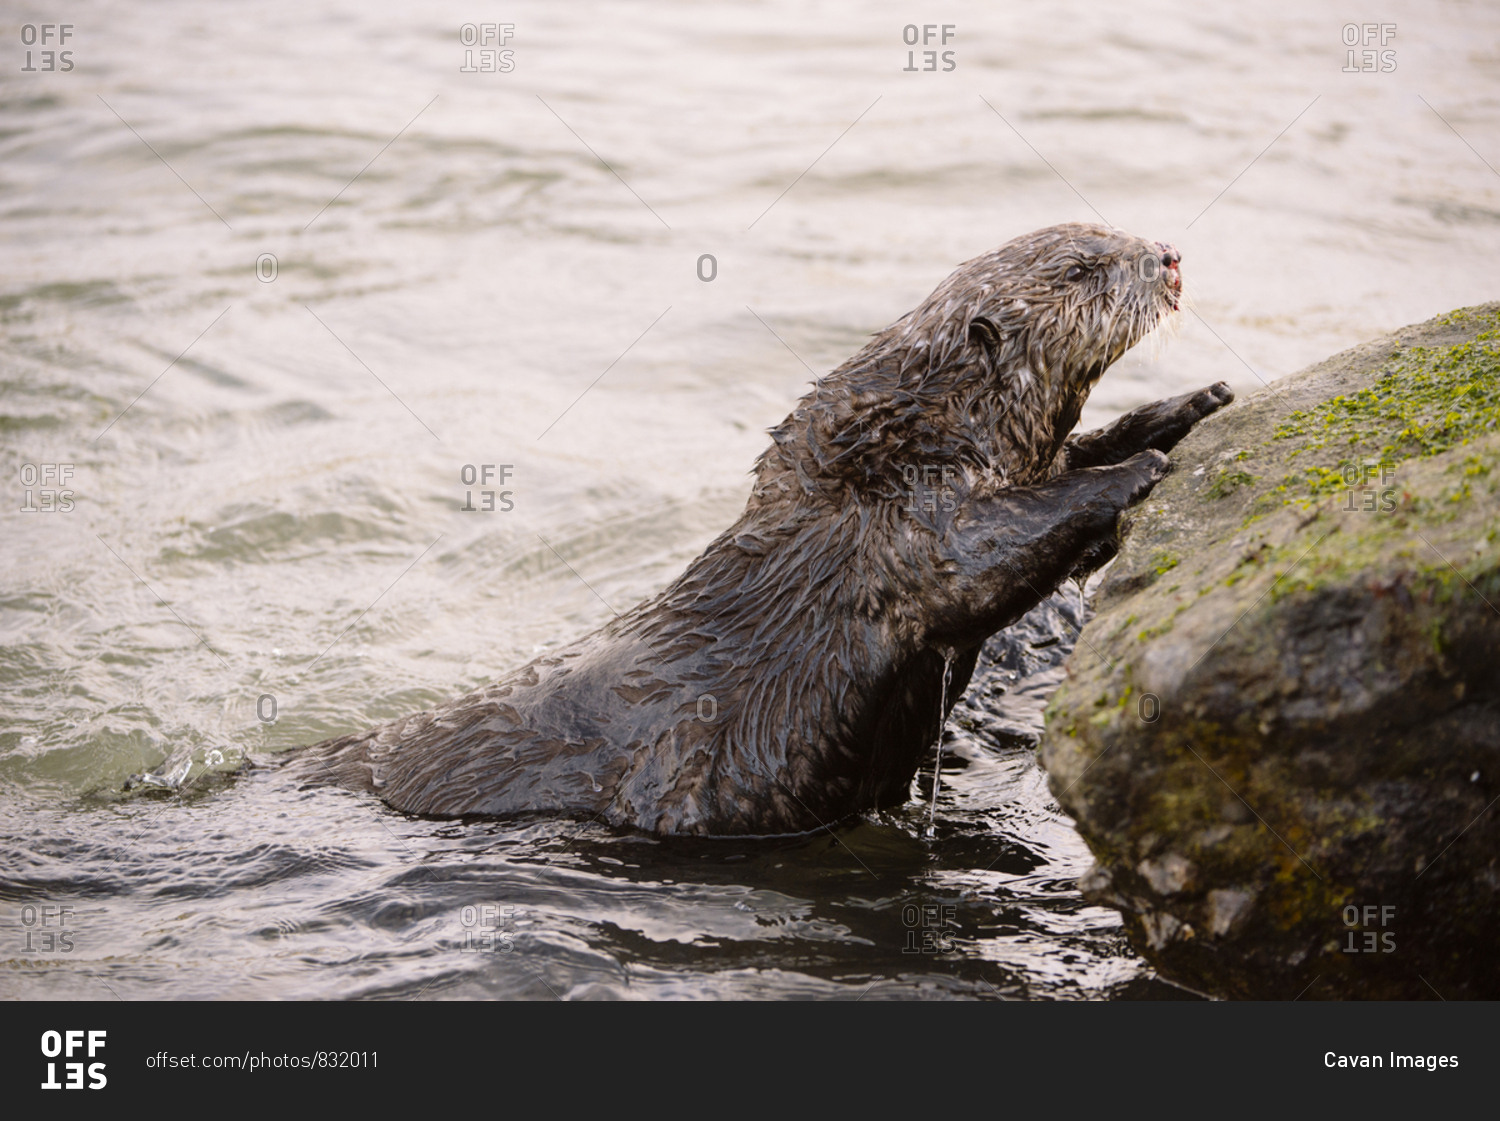 A sea otter climbs onto a rock from the water at Moss Landing.